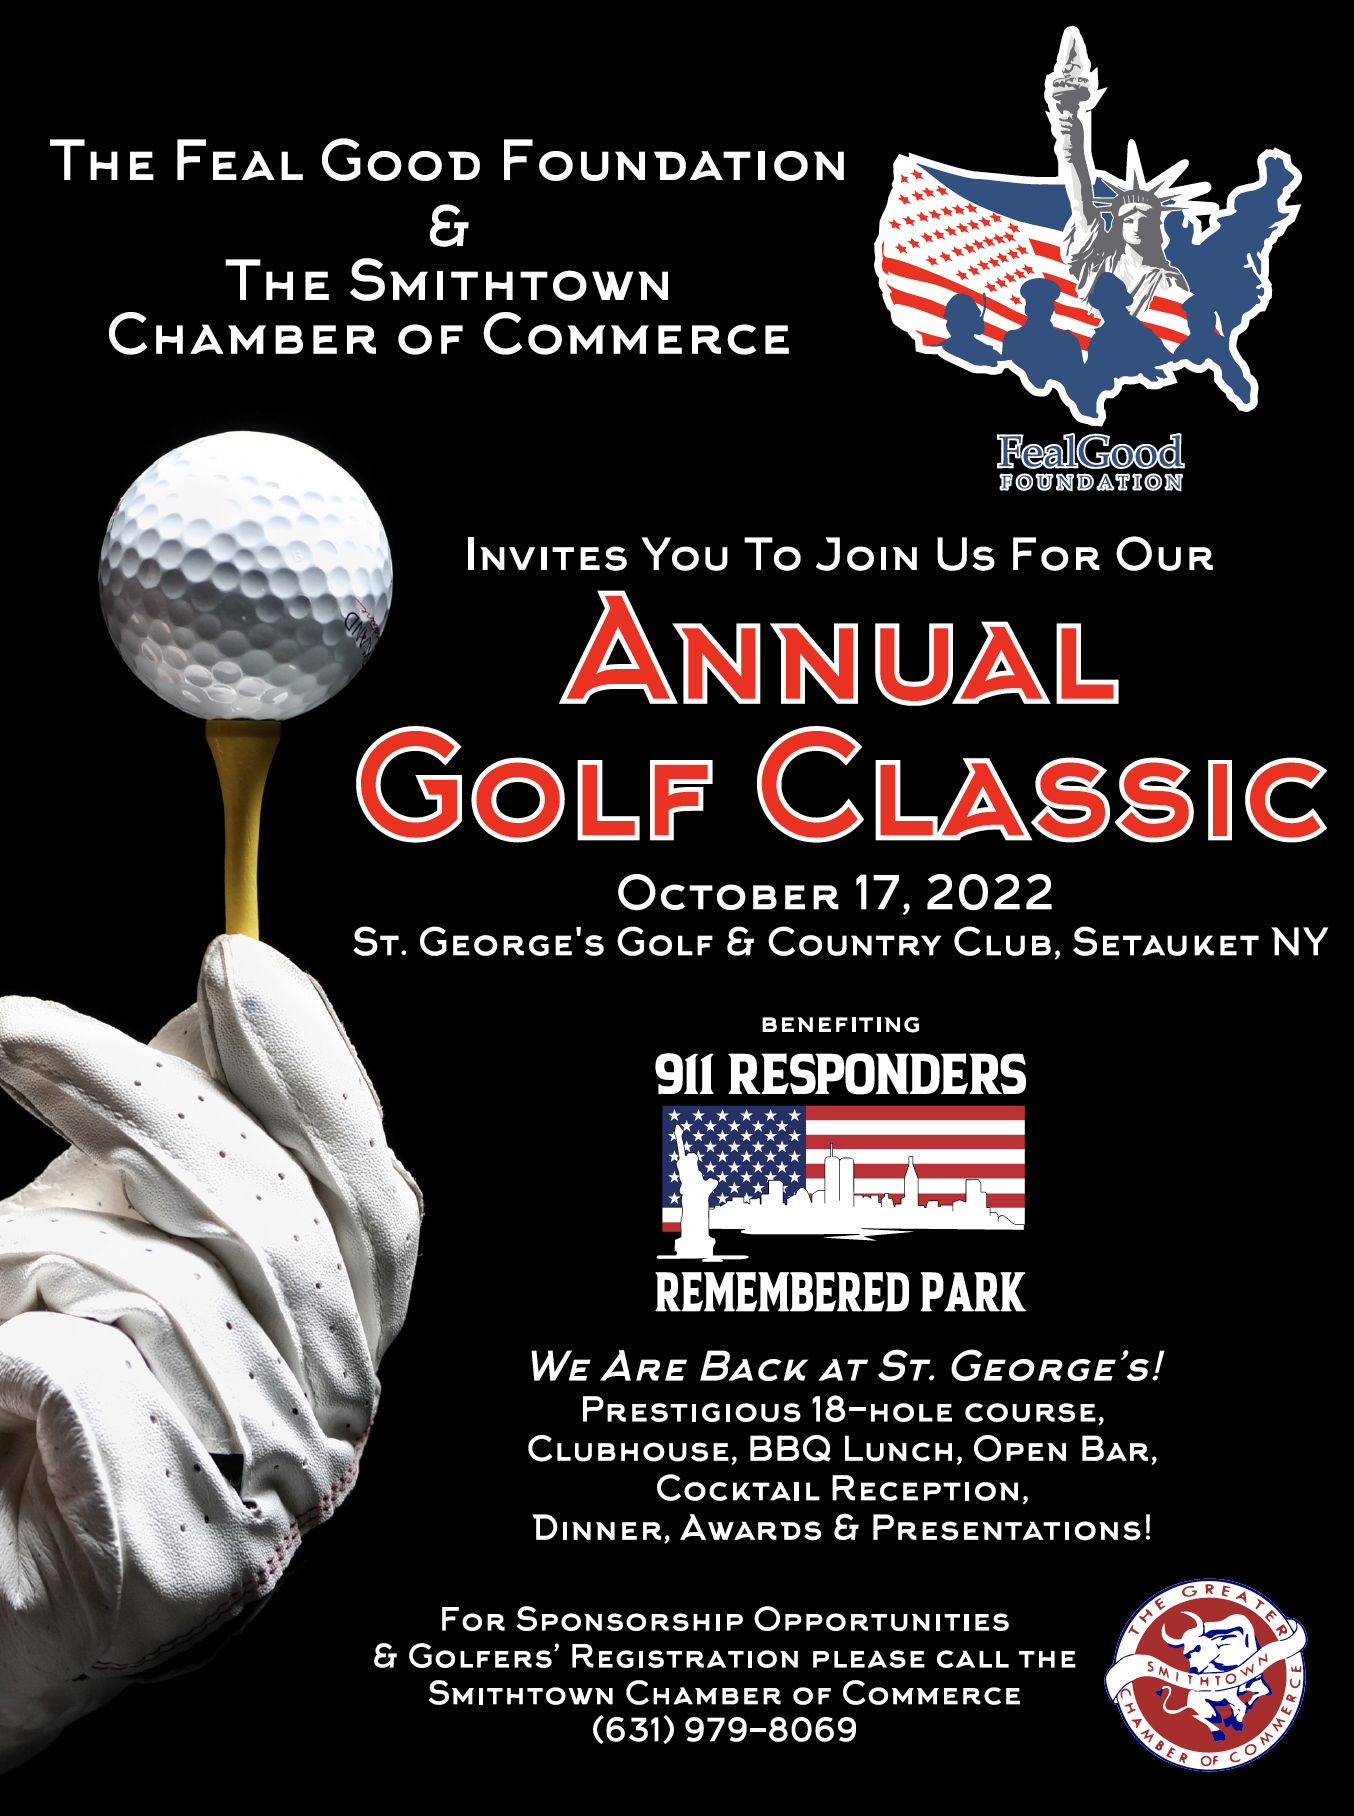 Annual Golf Classic October 17, 2022 St George's Golf and Country Club